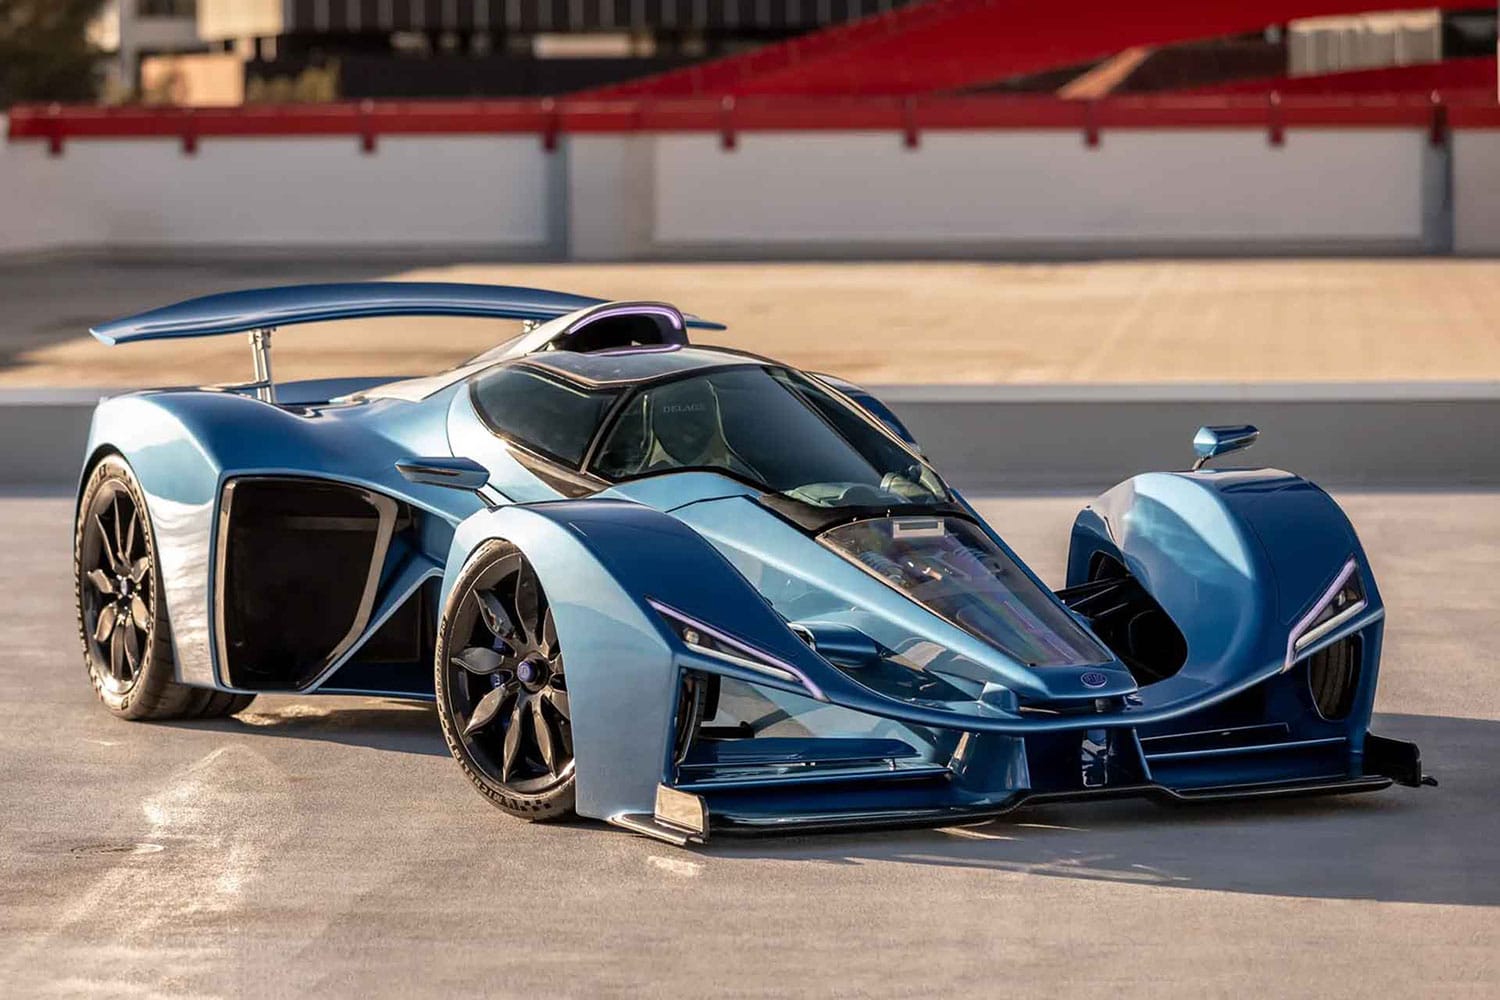 Historic French brand Delage returns with 1100 hp D12 hypercar.